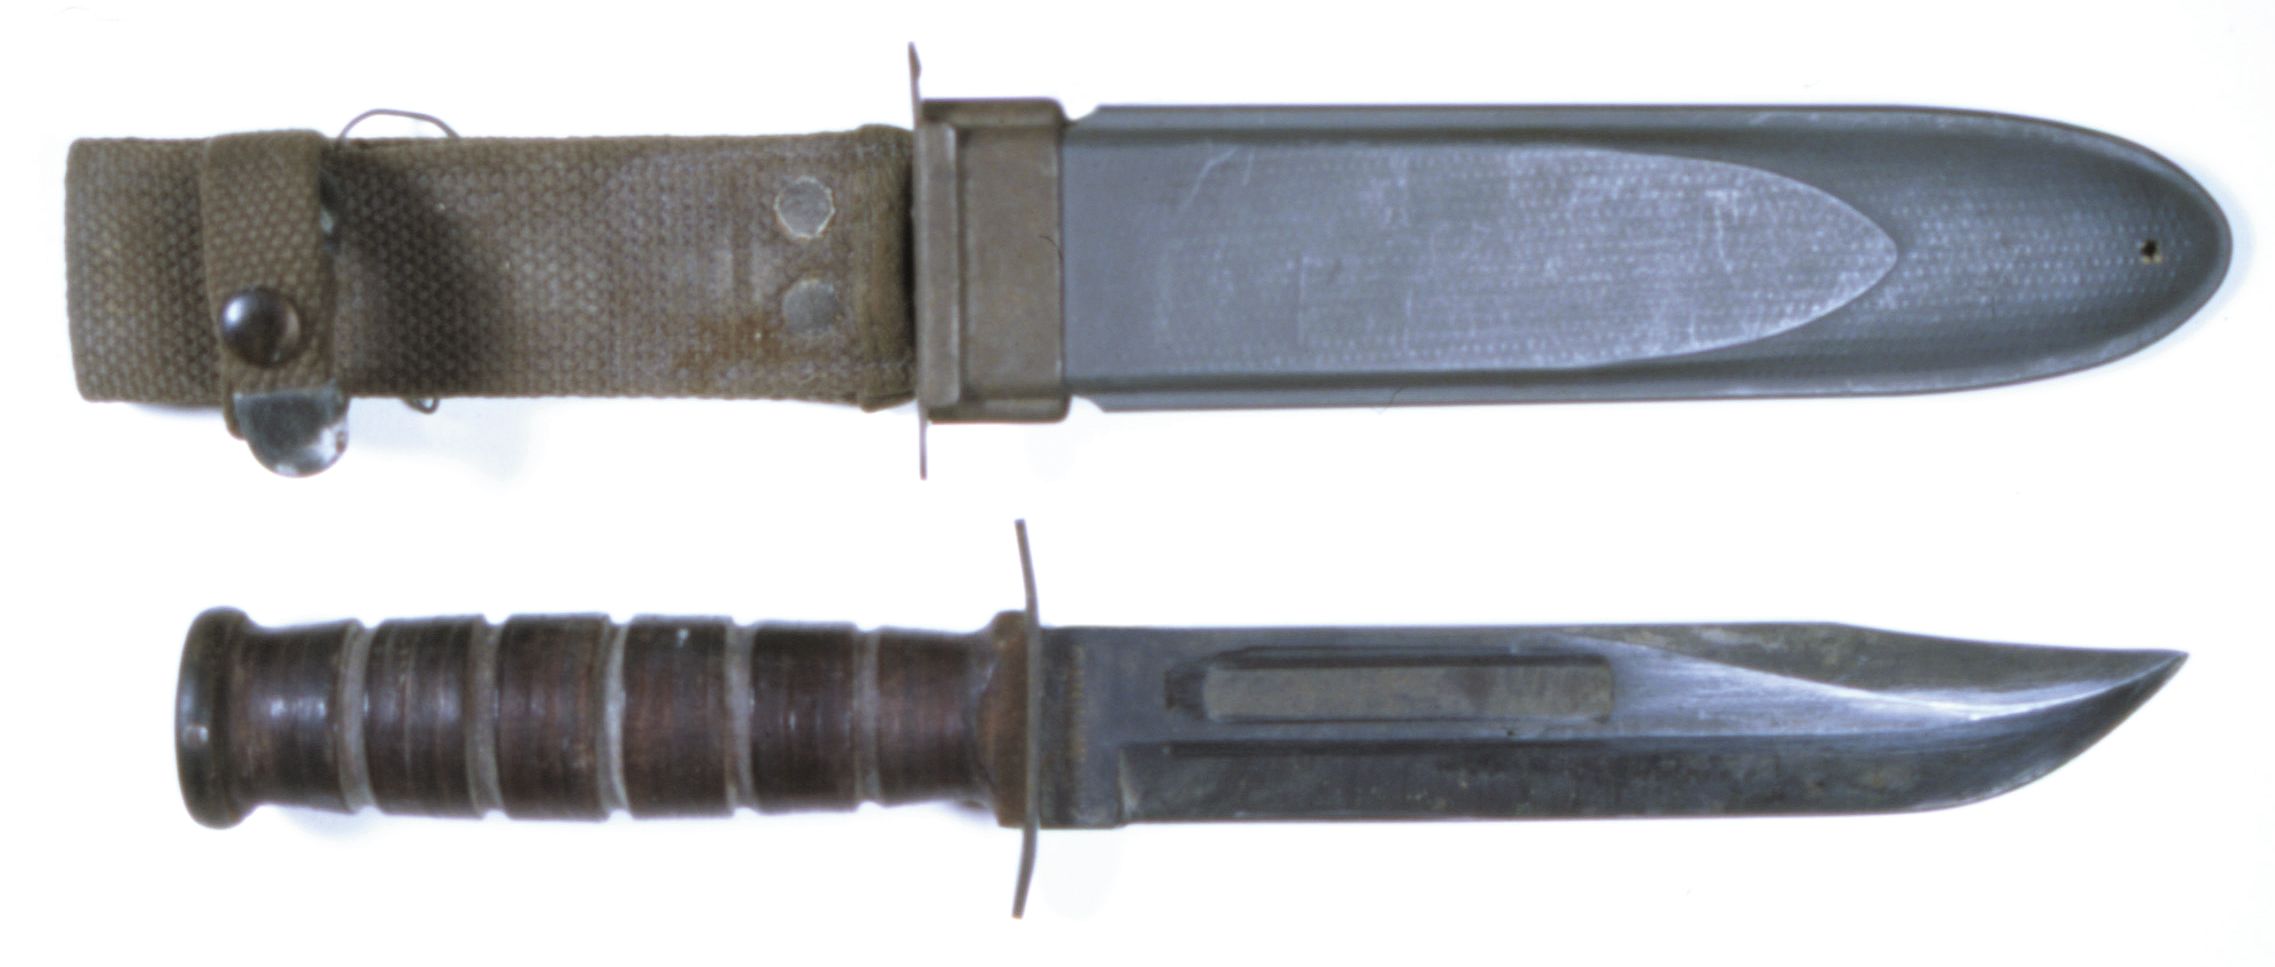 The U.S. Naval version of the Ka-Bar is known as the USN Mk II.